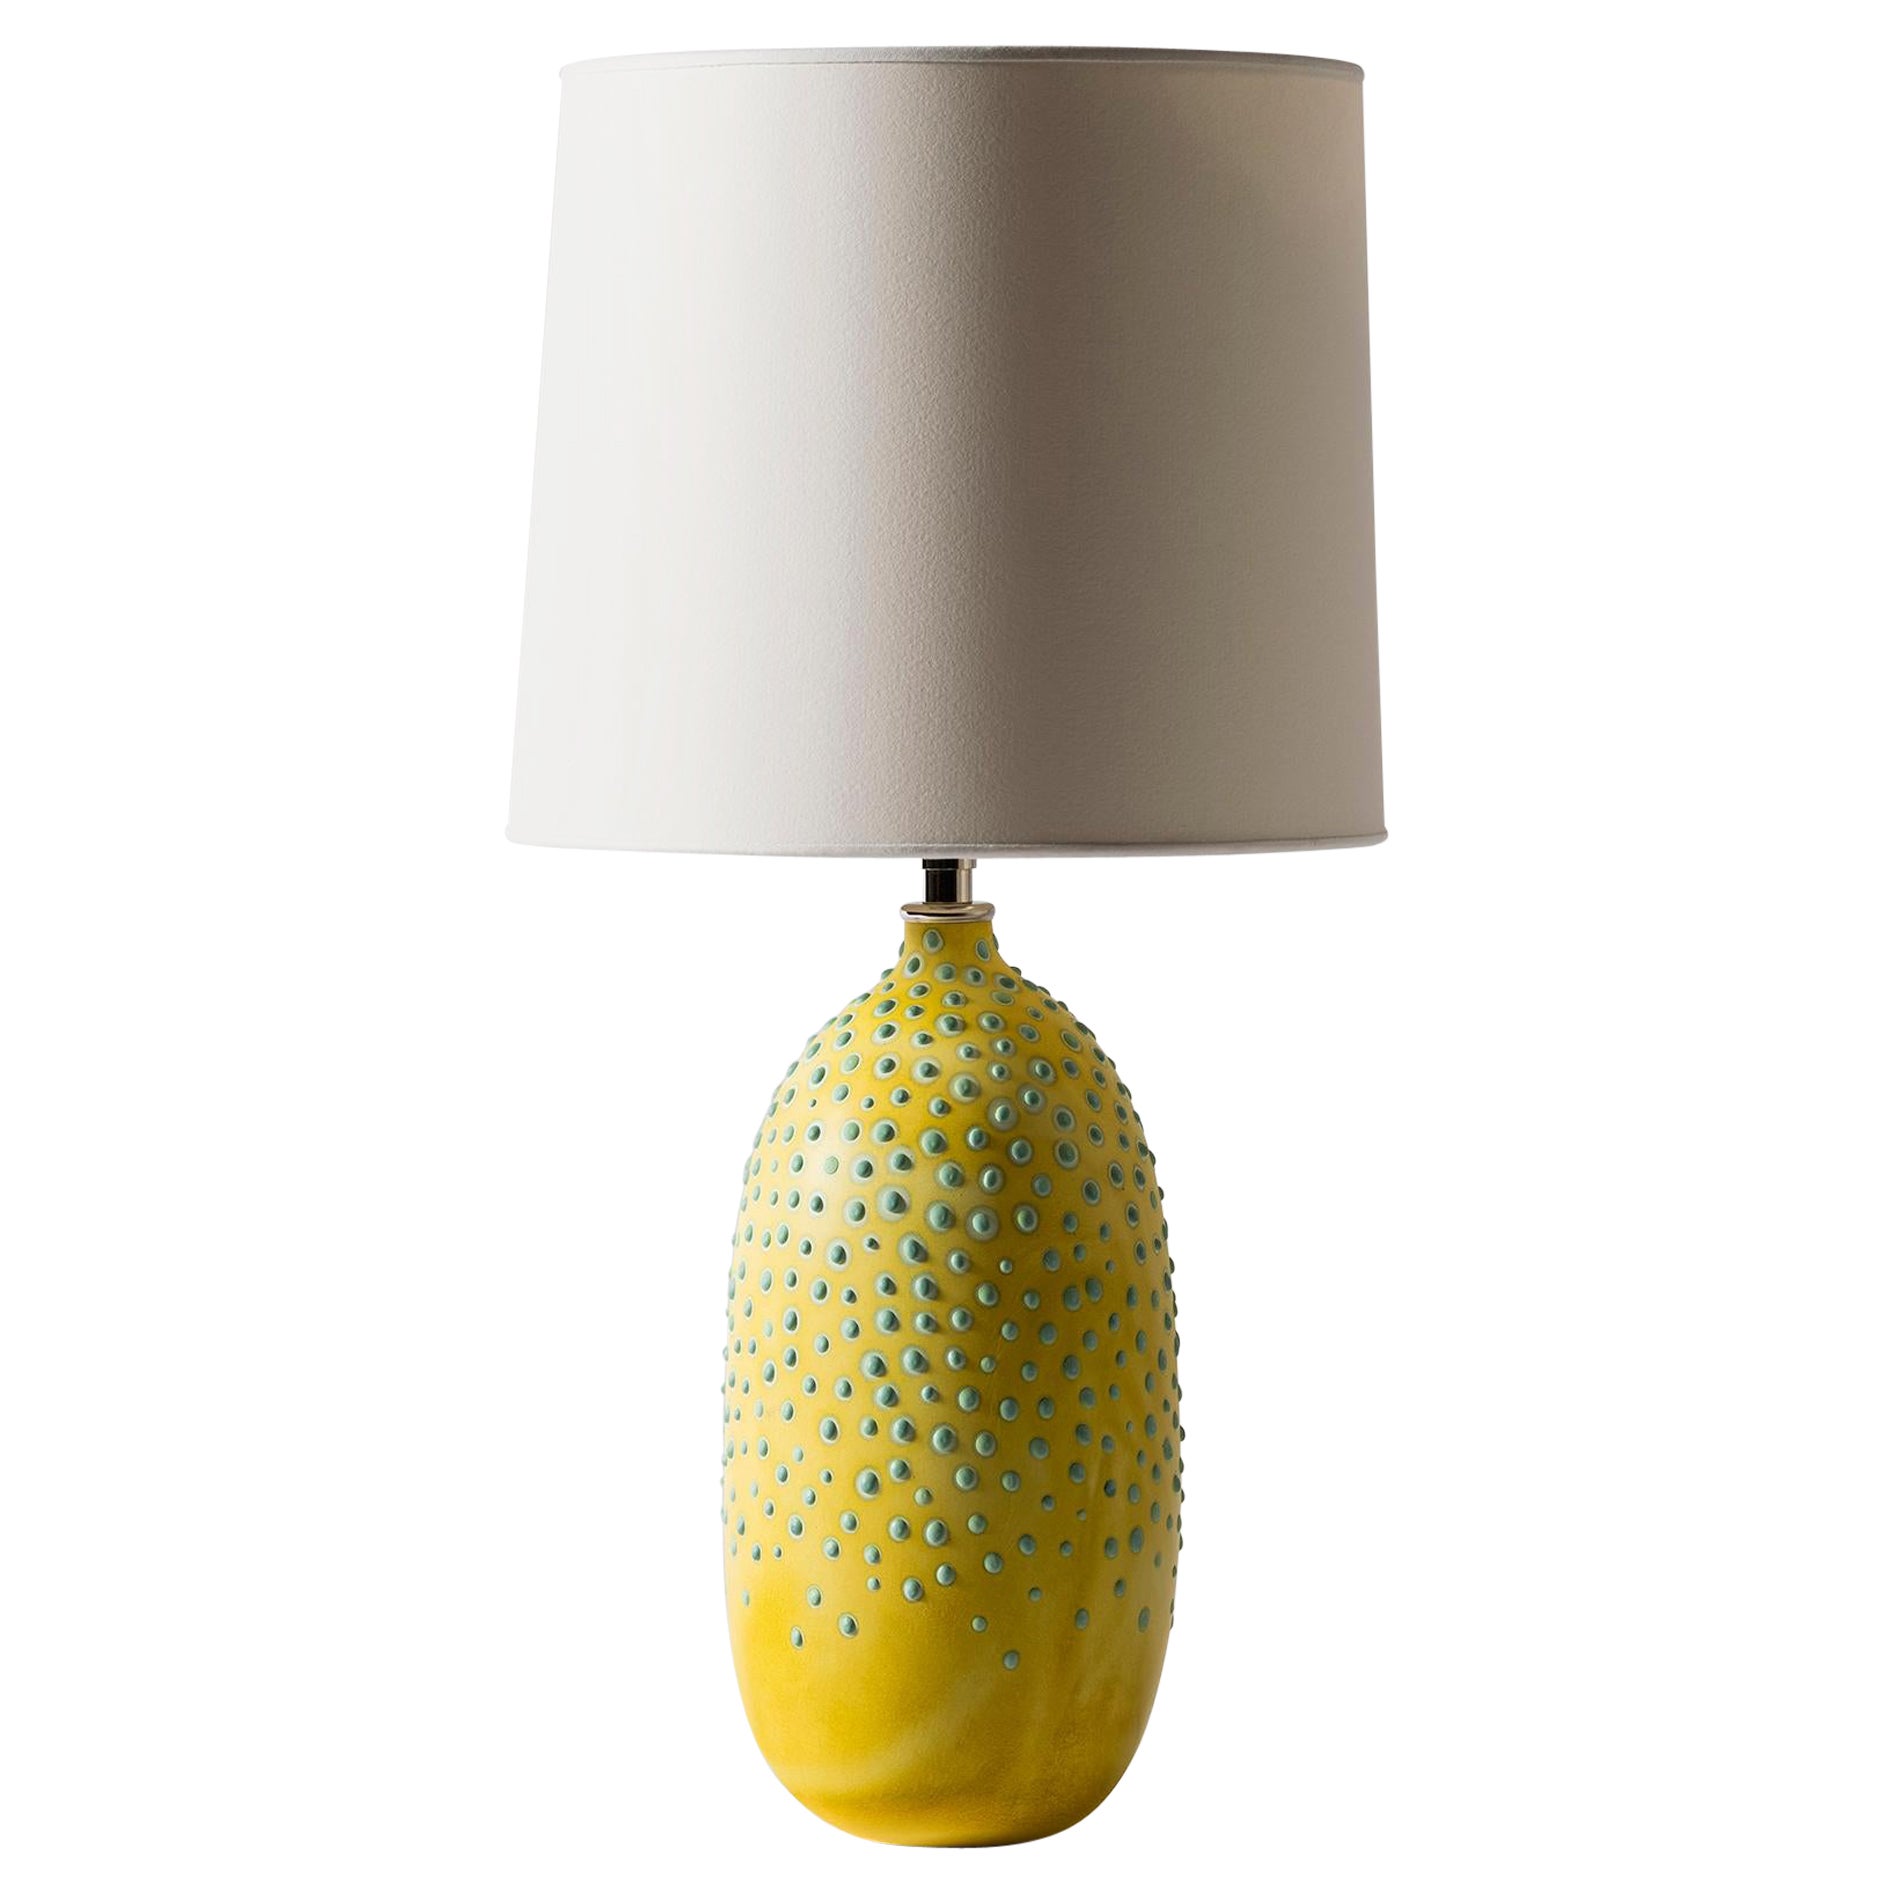 Contemporary Oblong Huxley Table Lamp in Lichen Yellow by Elyse Graham